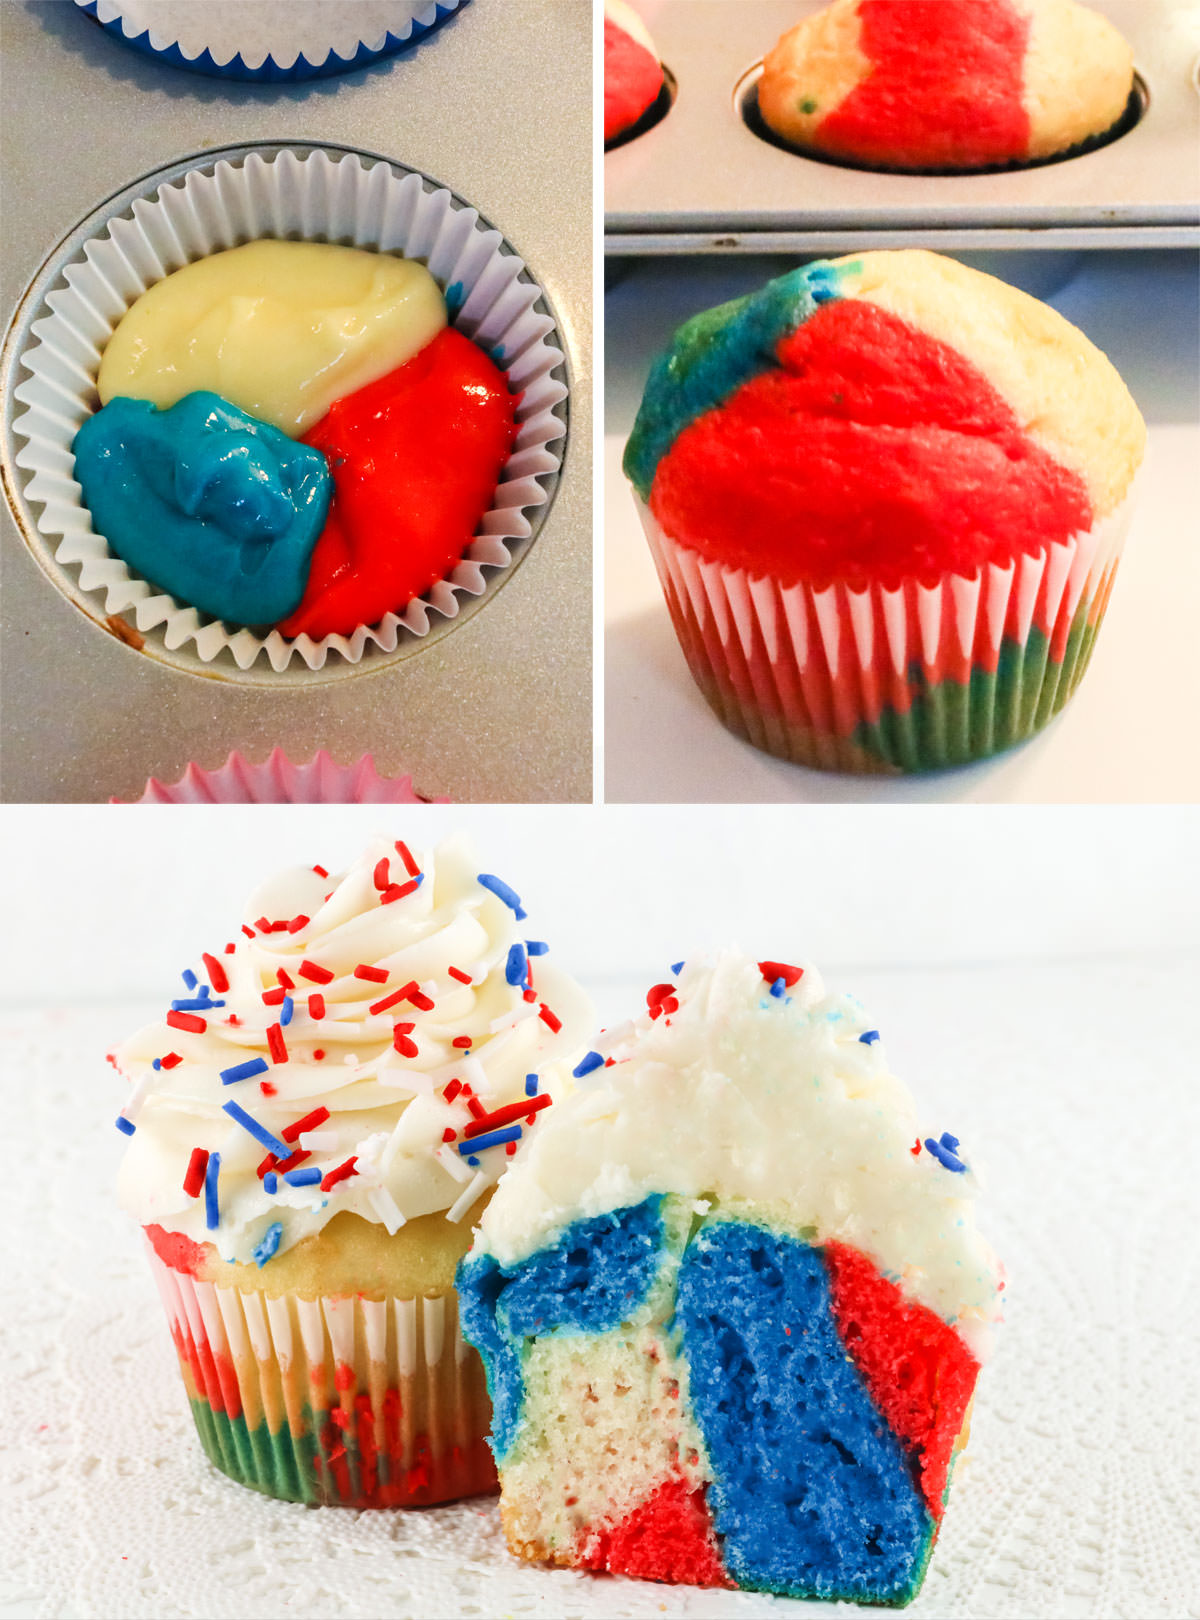 Collage image showing the steps need to make Patriotic Marble Cupcakes.